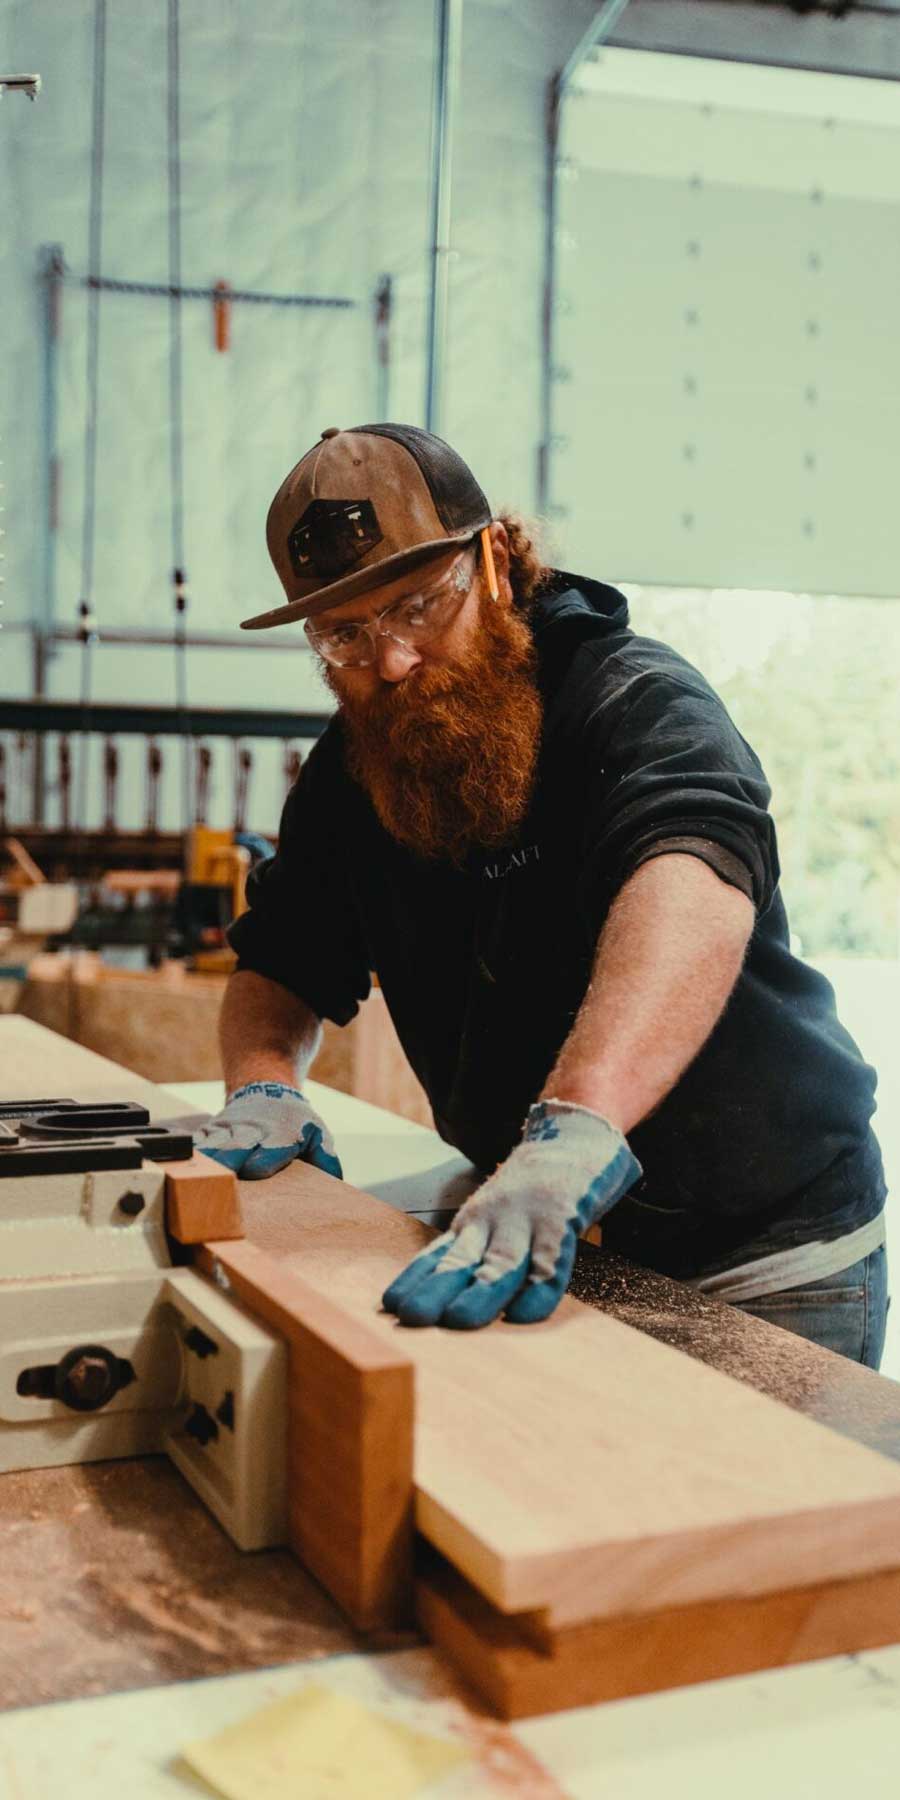 Craftsman with a long beard working on a wood cutting machine.